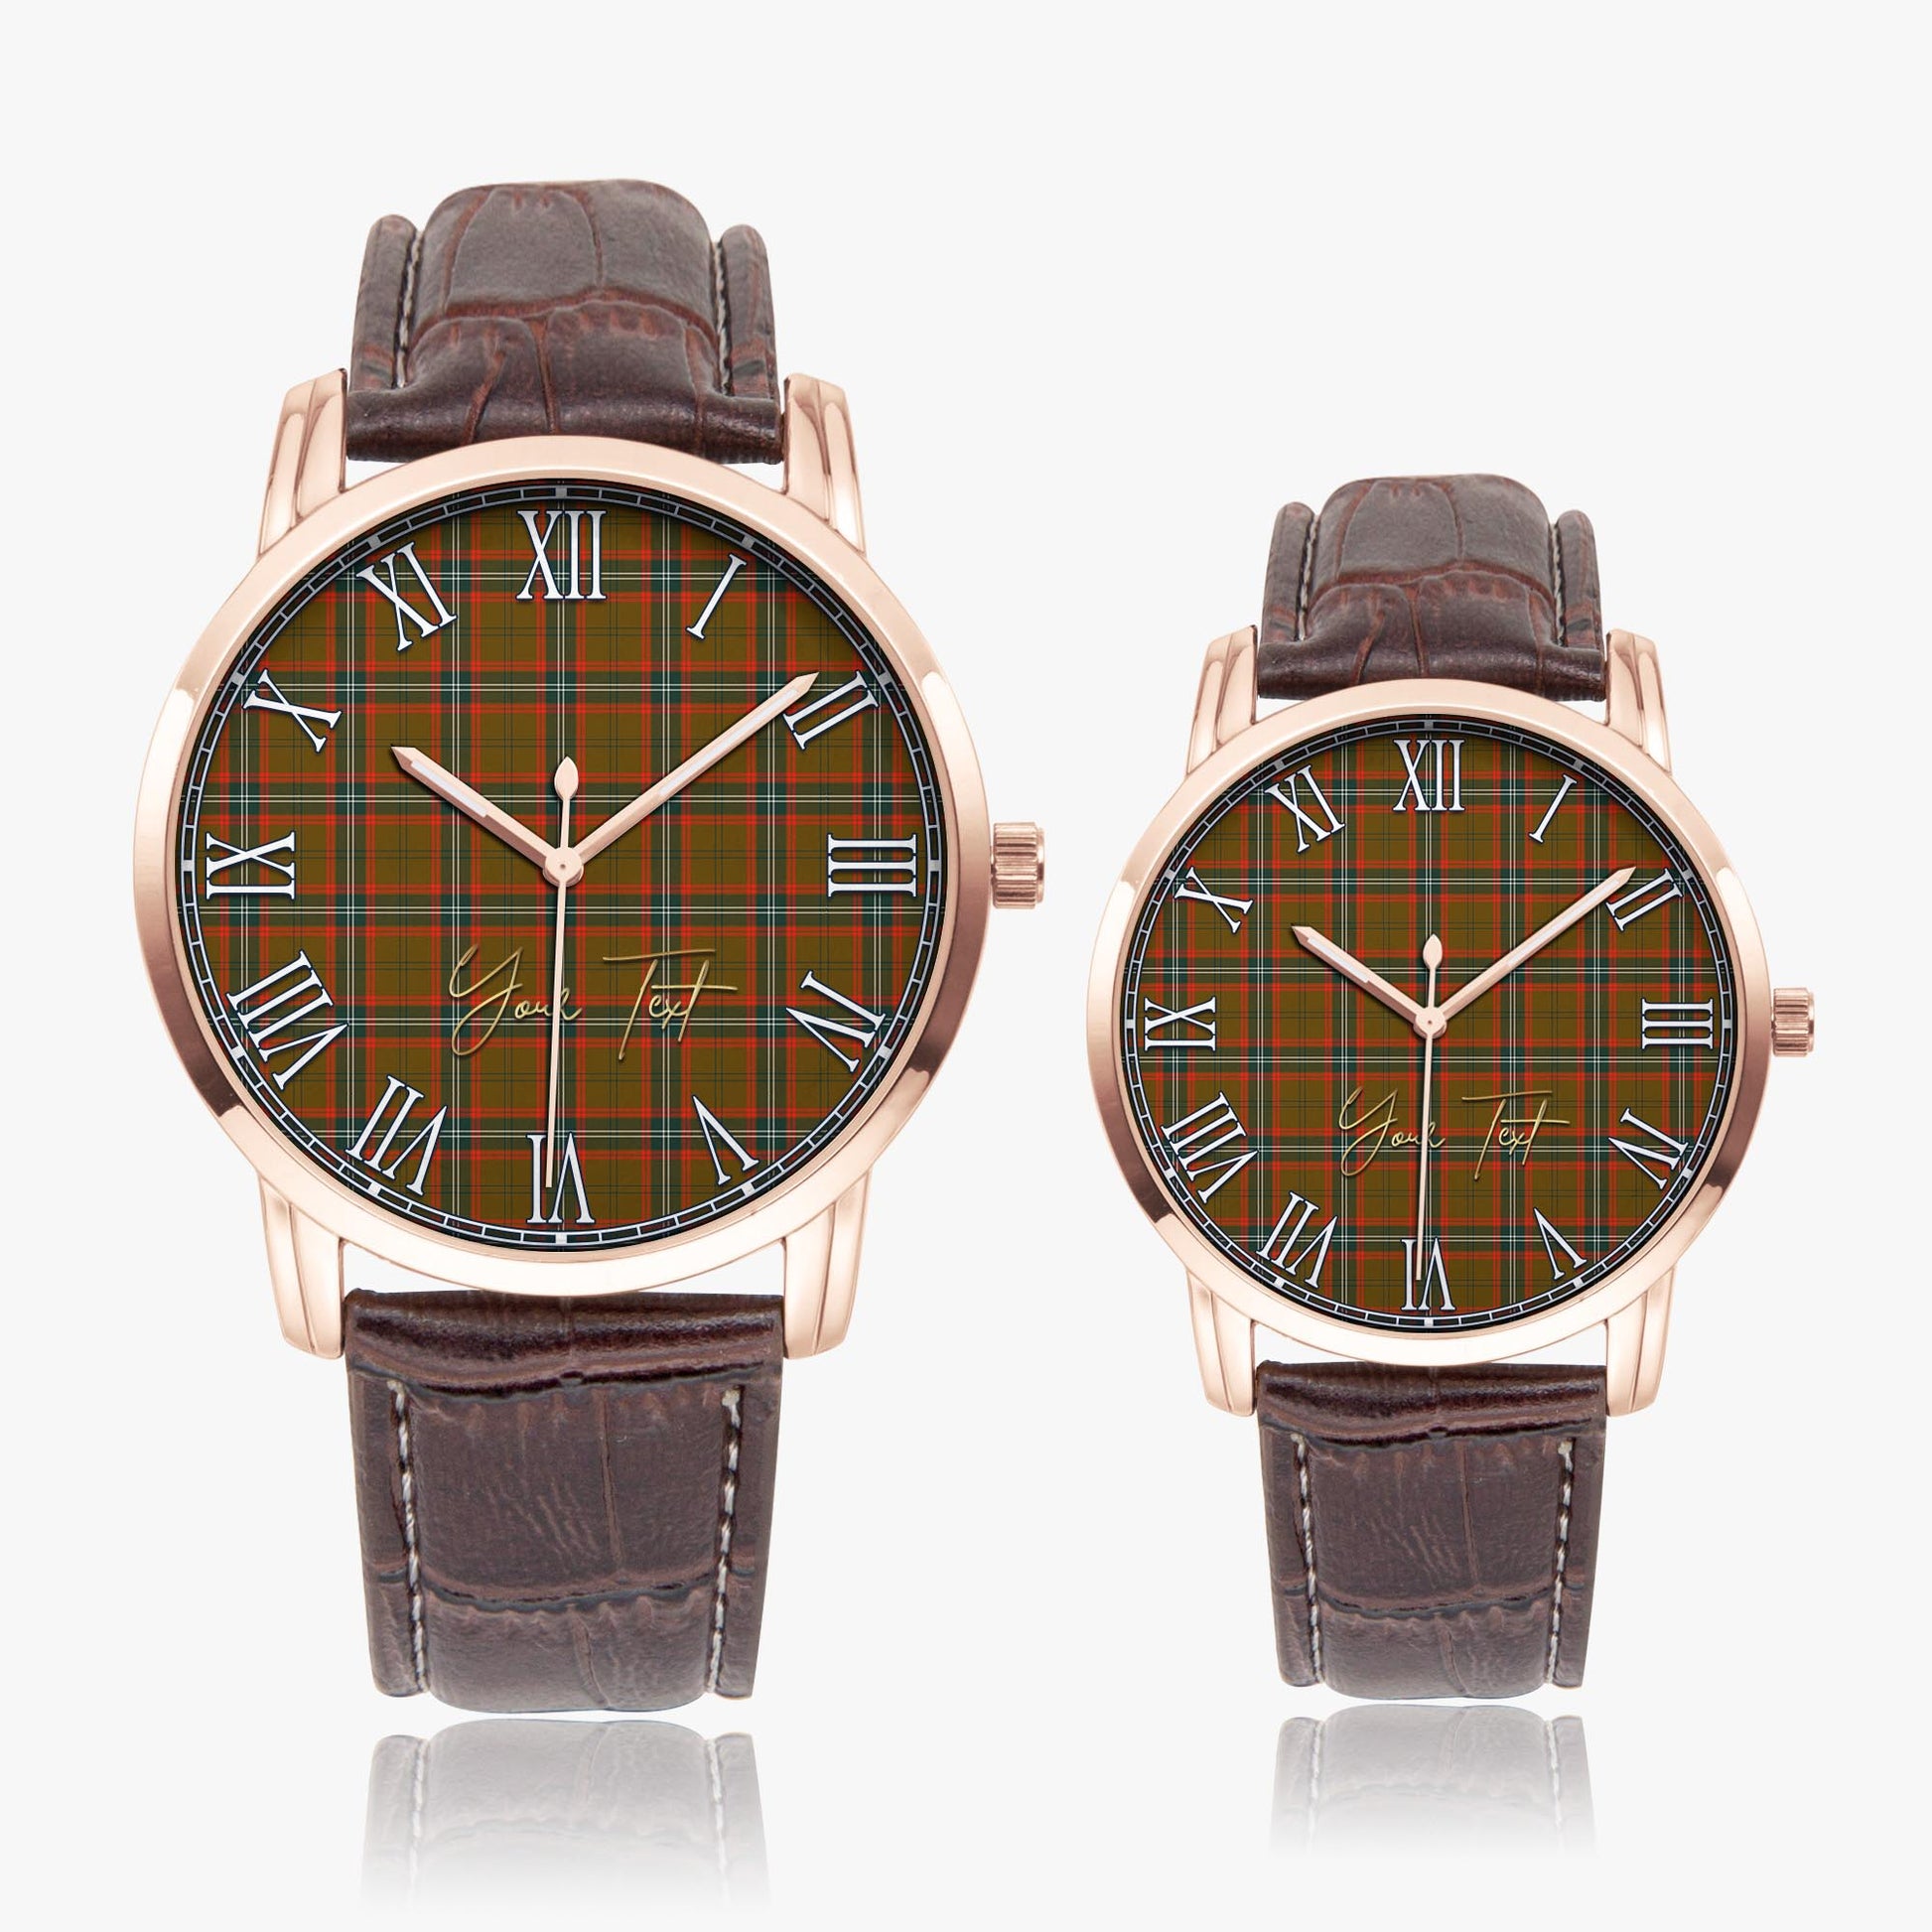 Seton Hunting Modern Tartan Personalized Your Text Leather Trap Quartz Watch Wide Type Rose Gold Case With Brown Leather Strap - Tartanvibesclothing